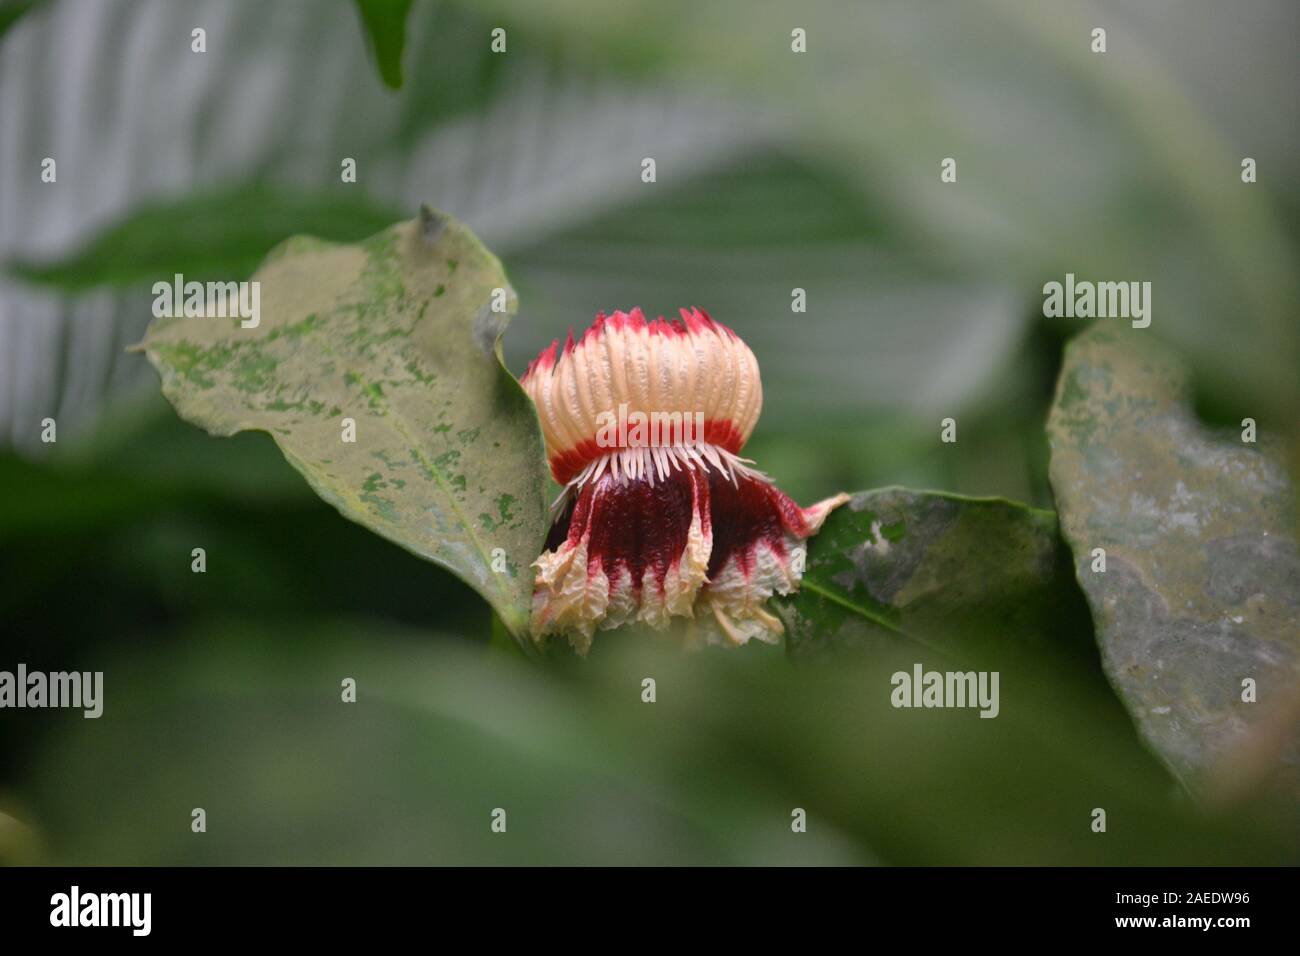 Strange compact, small flower nestled in thick, rough jungle leaves. Squat shape wiht a crown, drooping lower petals and small frondy ones. Dark red, Stock Photo